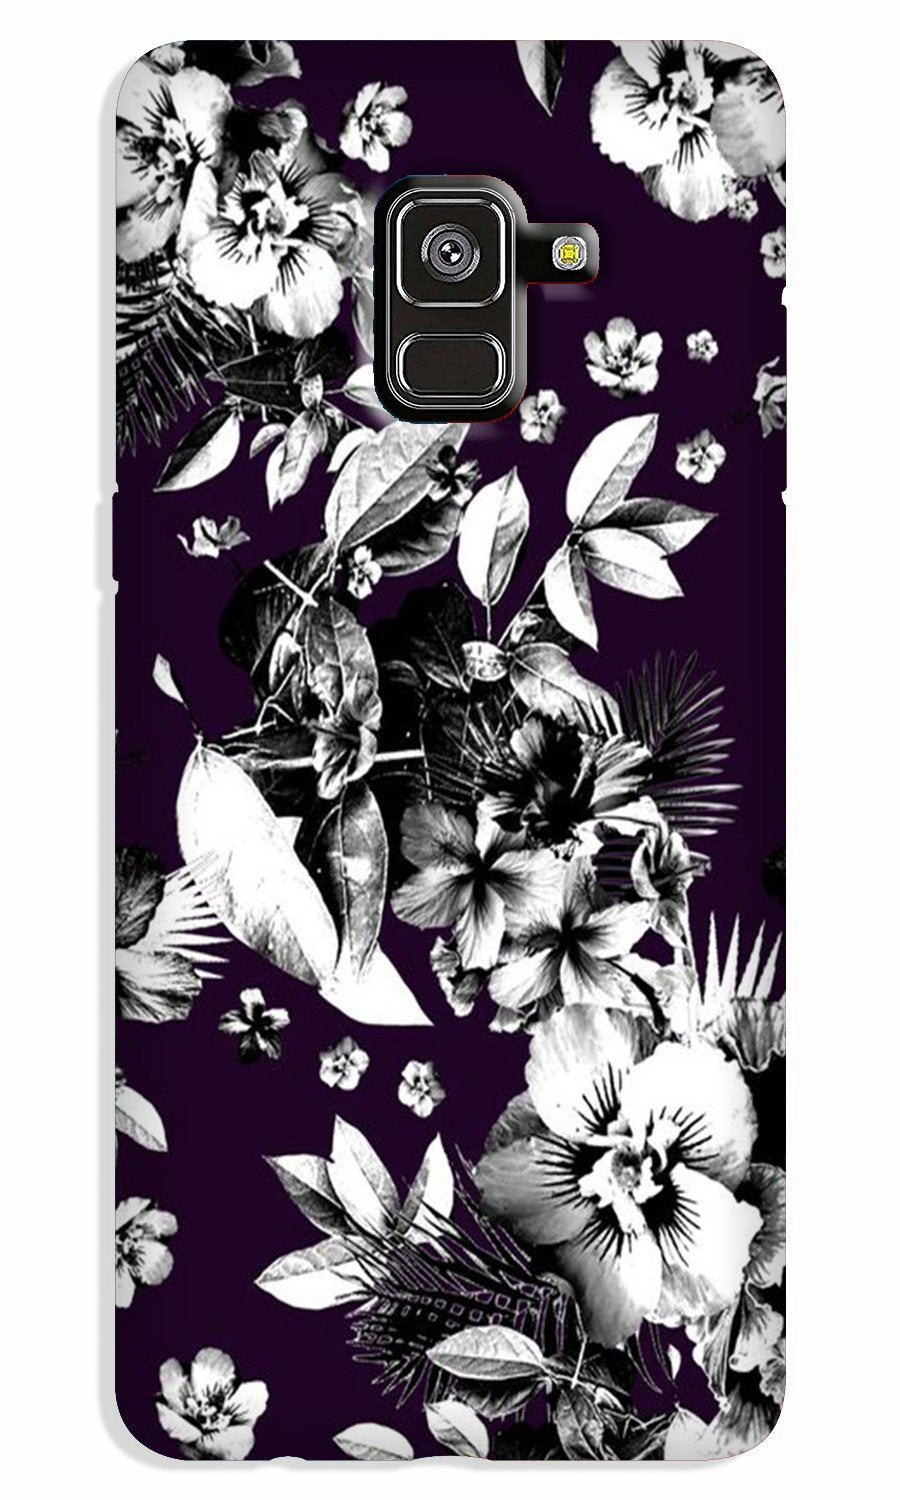 white flowers Case for Galaxy A8 Plus